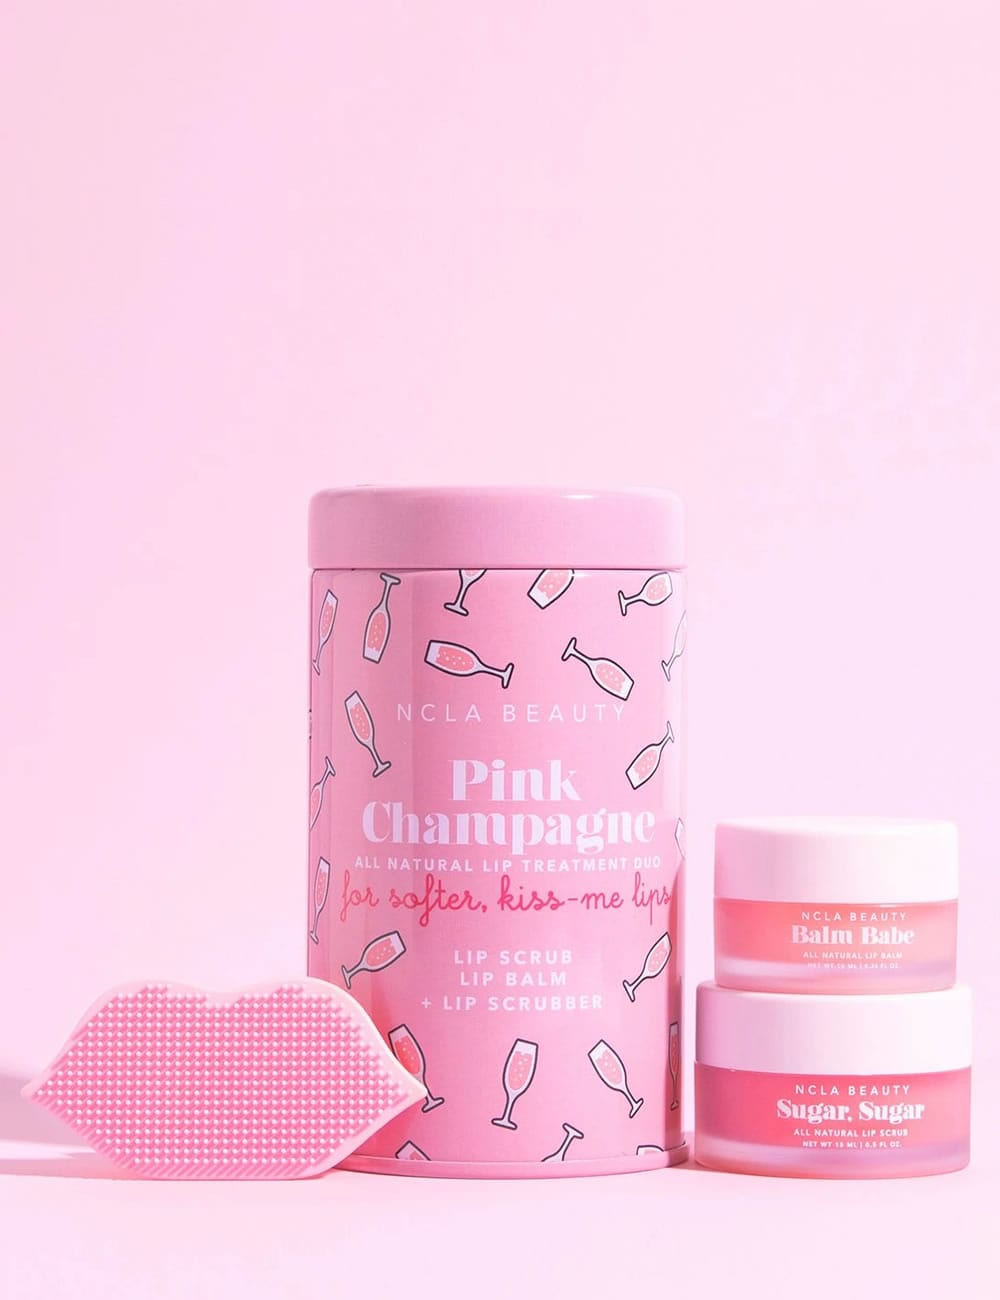 NCLA BEAUTY Pink Champagne Lip Care Duo